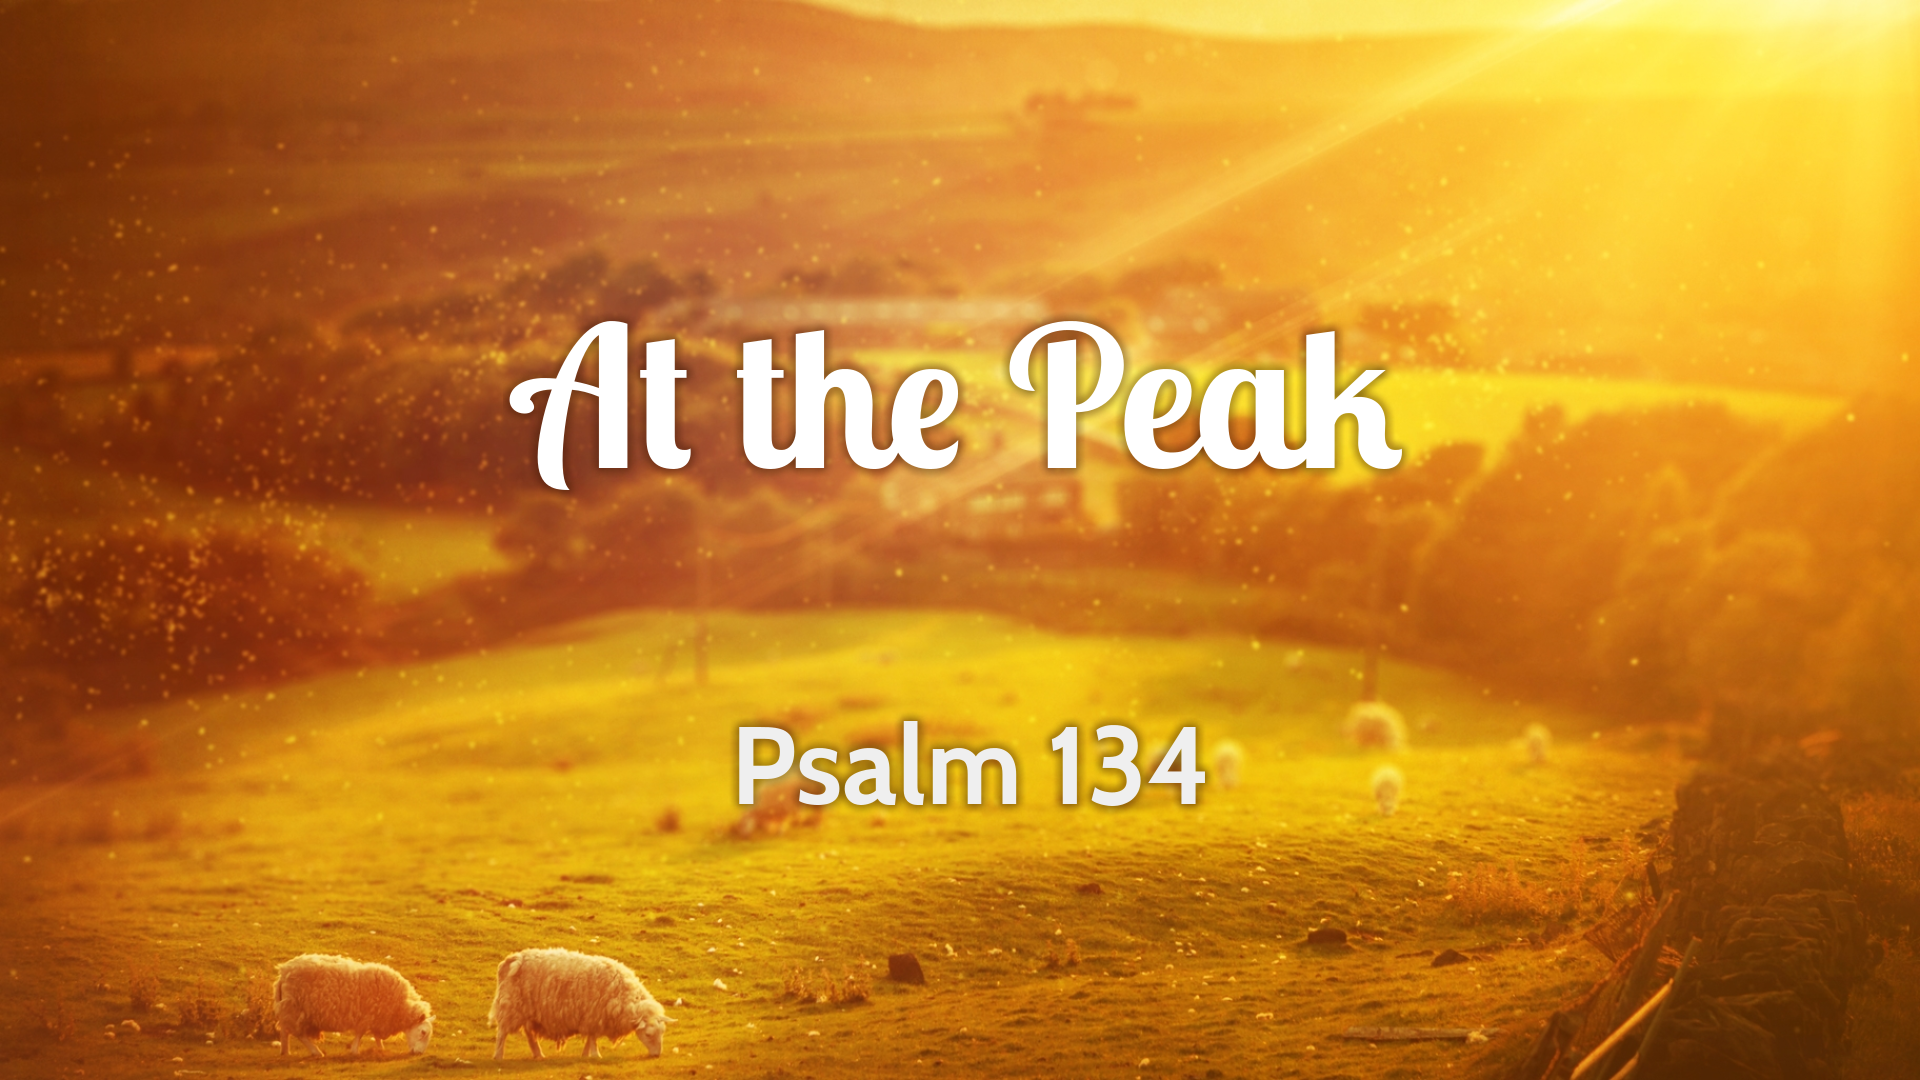 May 31, 2020 - At the Peak (Video) Psalm 134